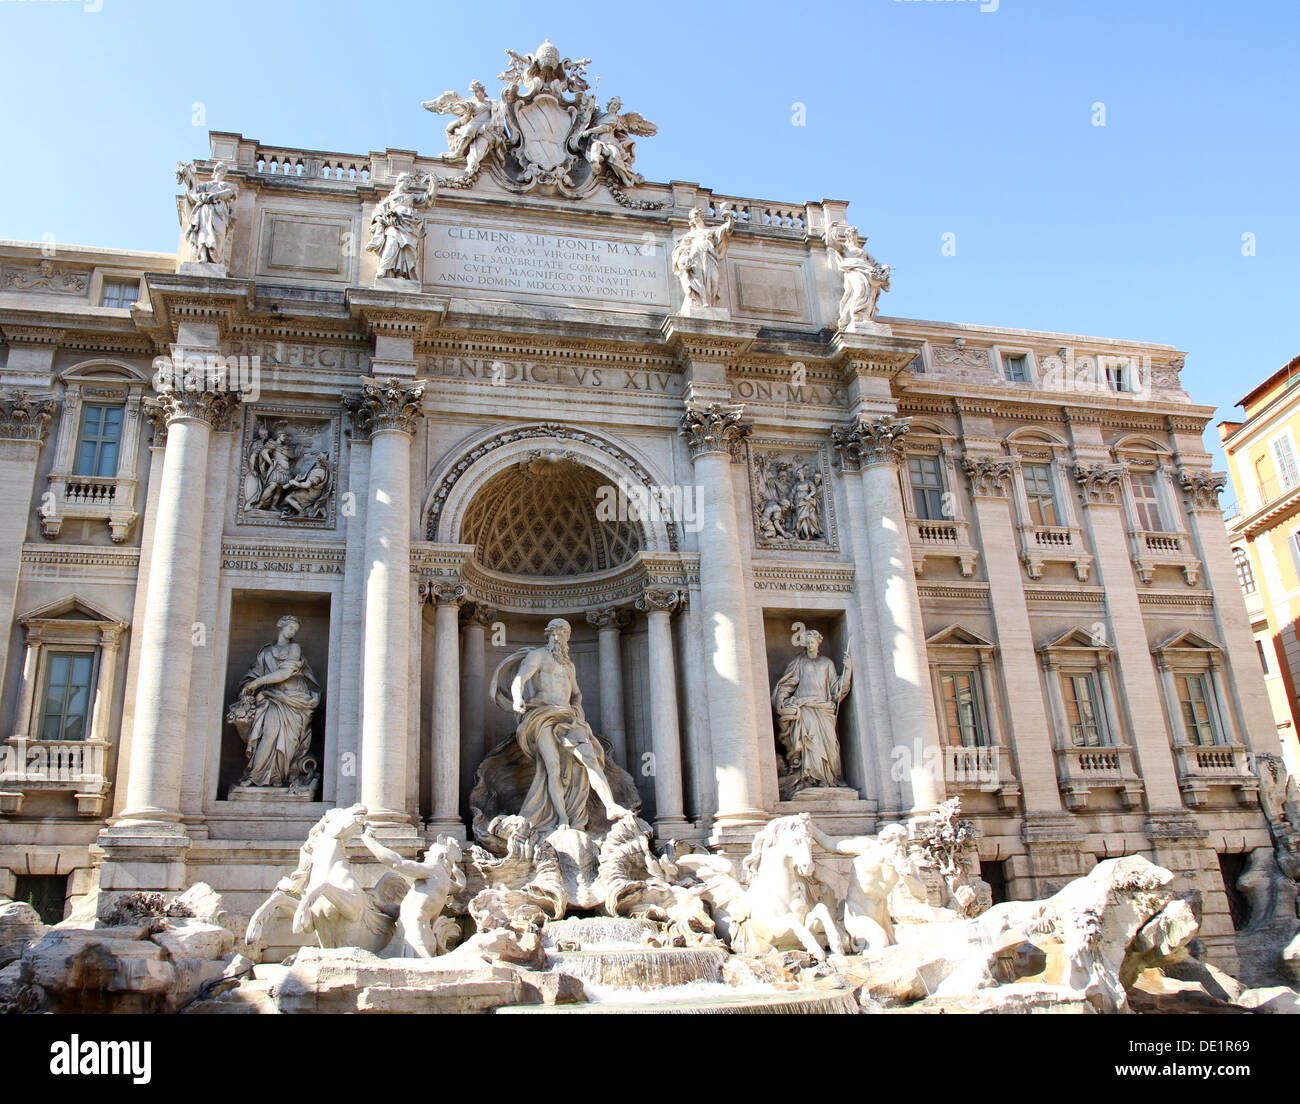 Fountain of trevi in Rome center with white marble statues Stock Photo